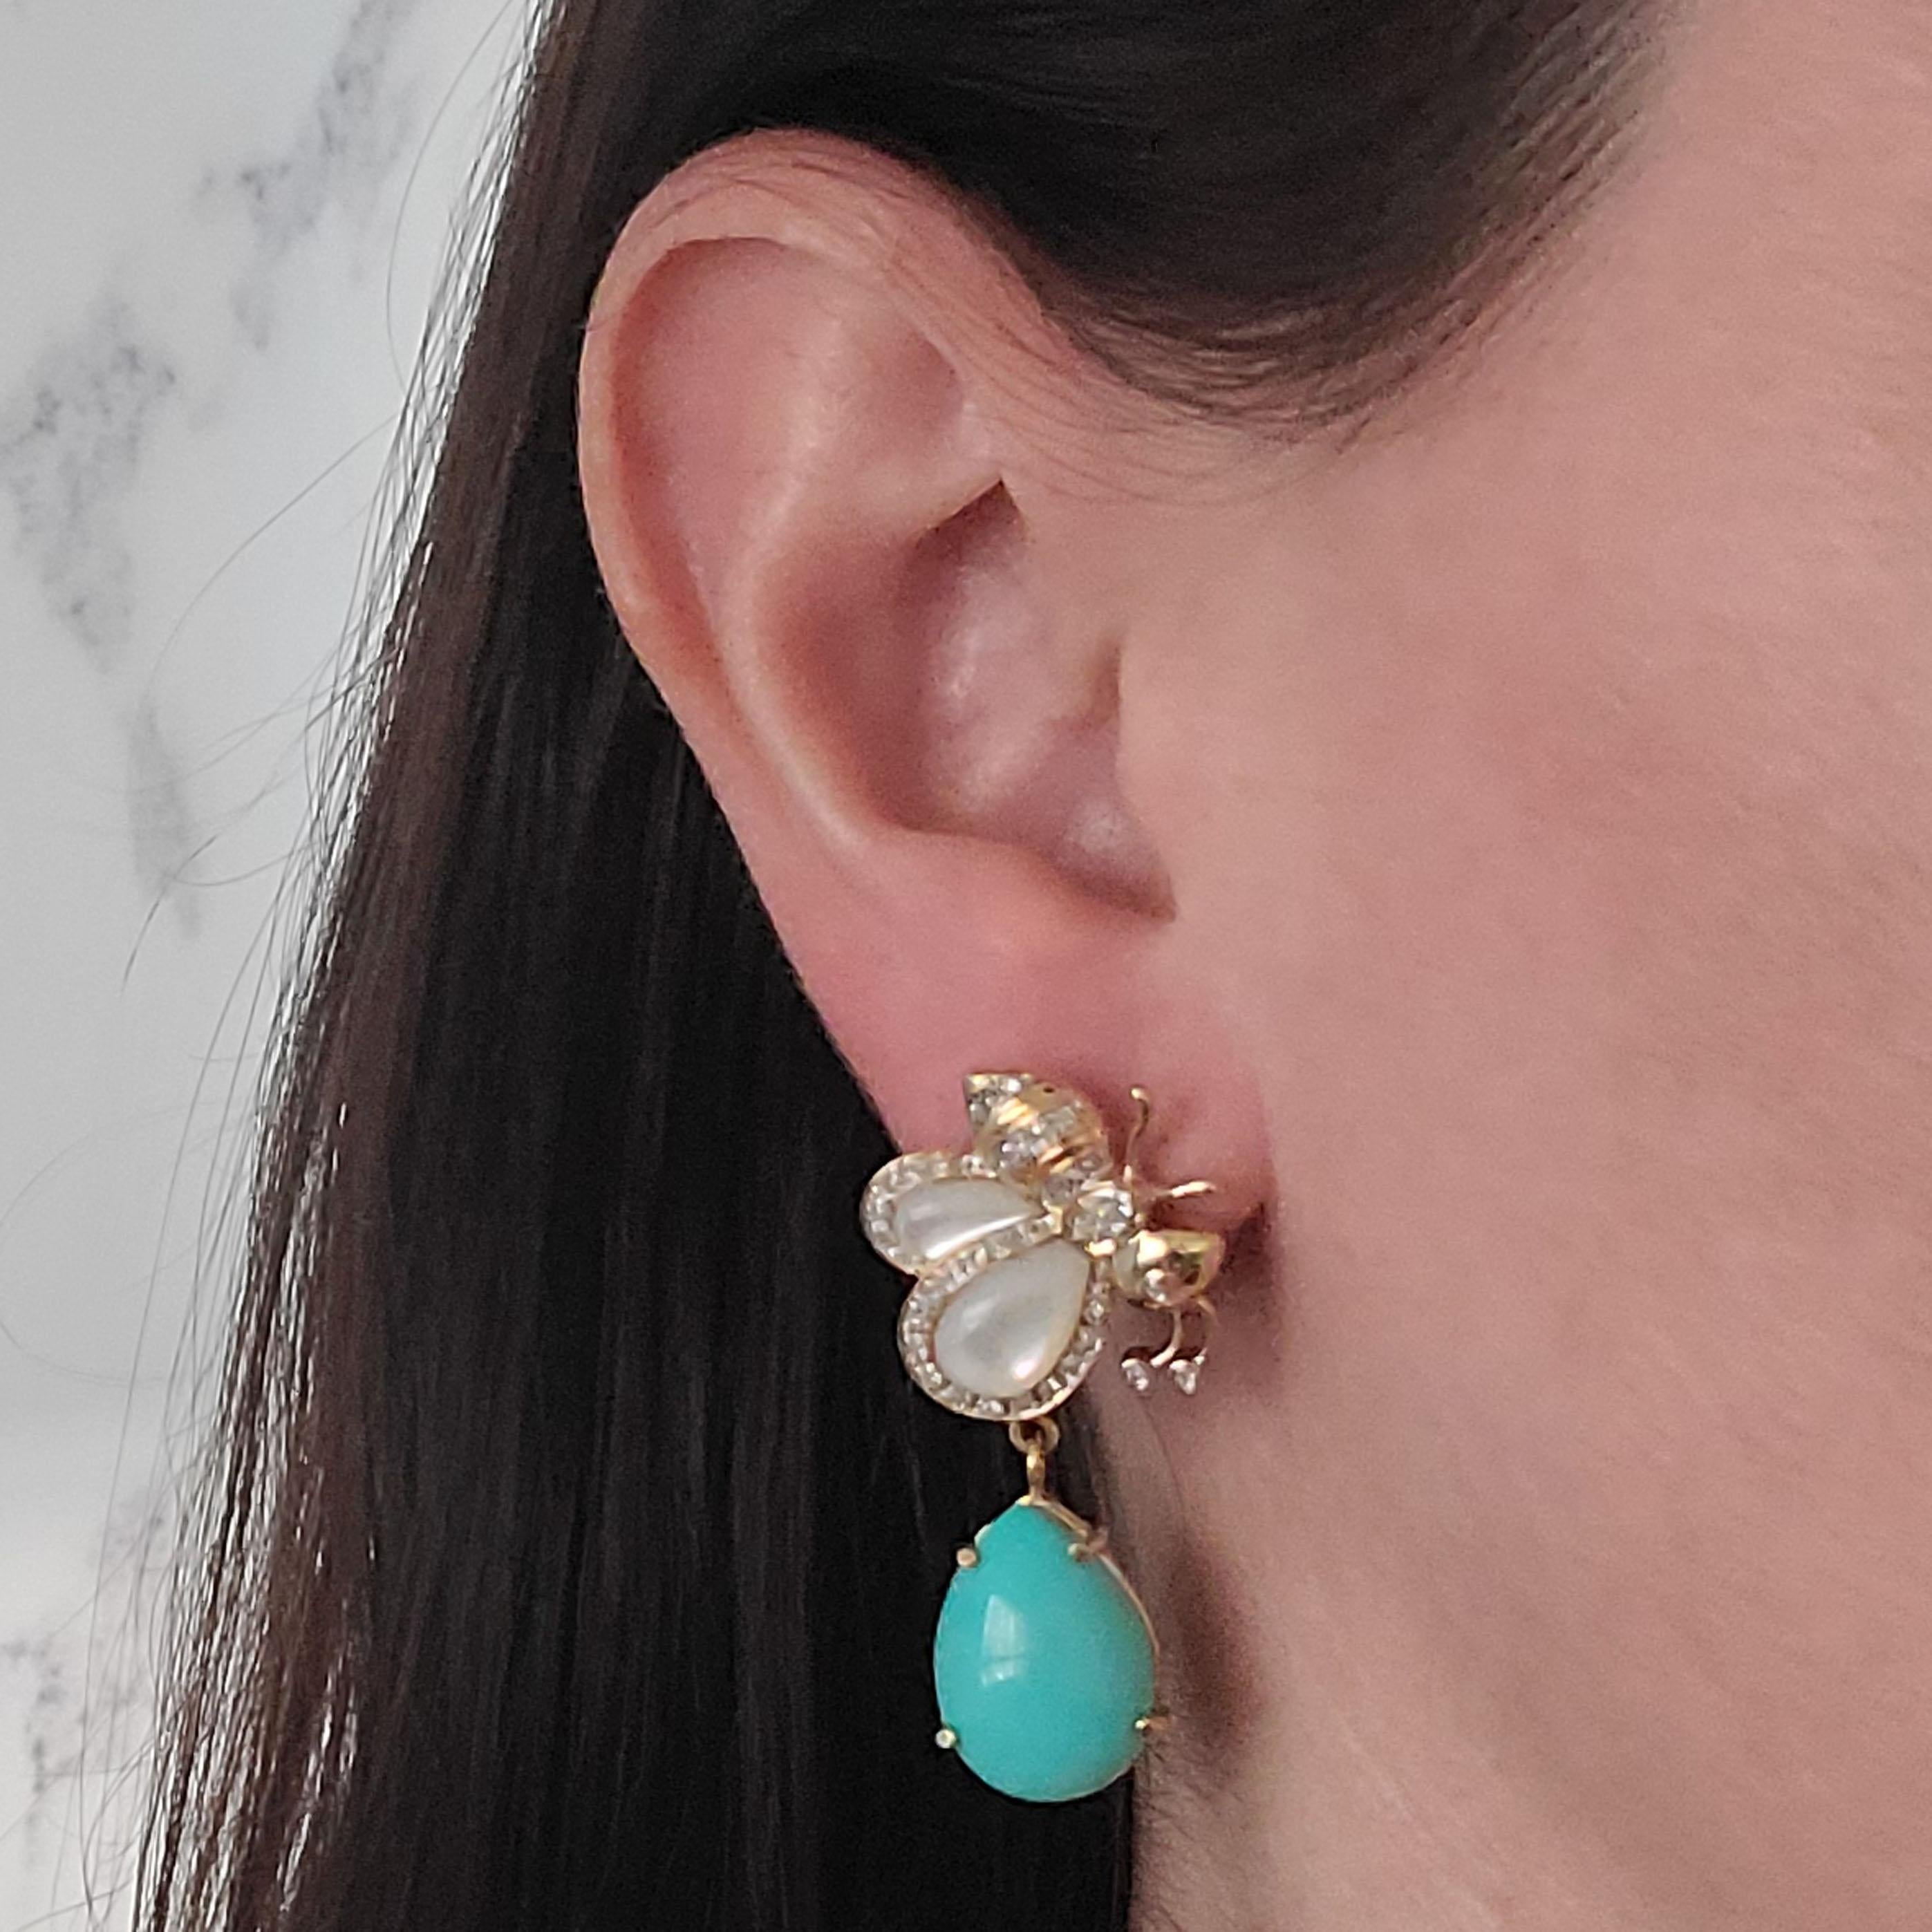 Sazingg 14 Karat Yellow Gold Bee Drop Earrings Featuring Cabochon Turquoise, Mother Of Pearl, and 80 Round Diamonds Of VS Clarity & G/H Color Totaling 0.40 Carats. 1.6 Inches Long. Pierced Post With Friction Back. Finished Weight Is 11.8 Grams.